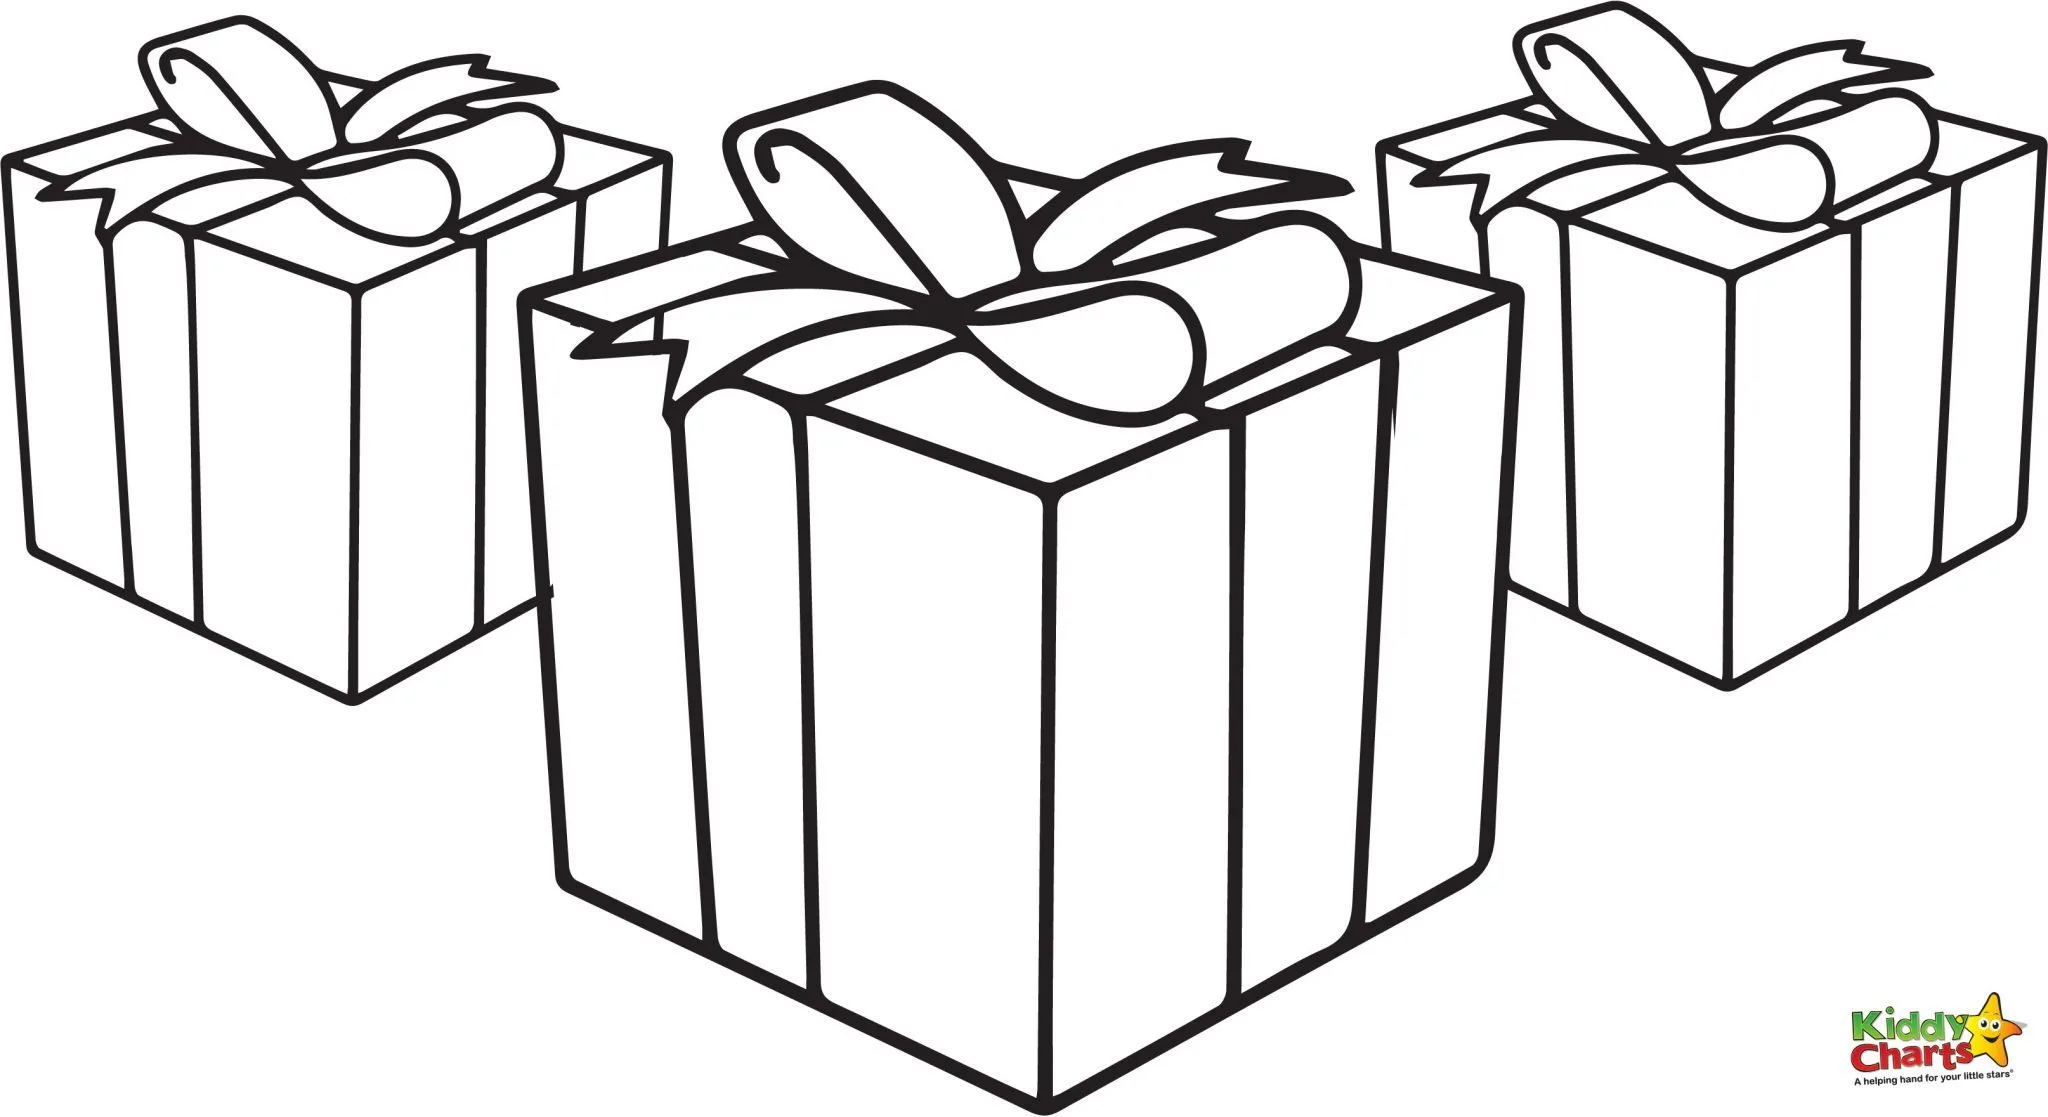 Presents - free Christmas coloring pages